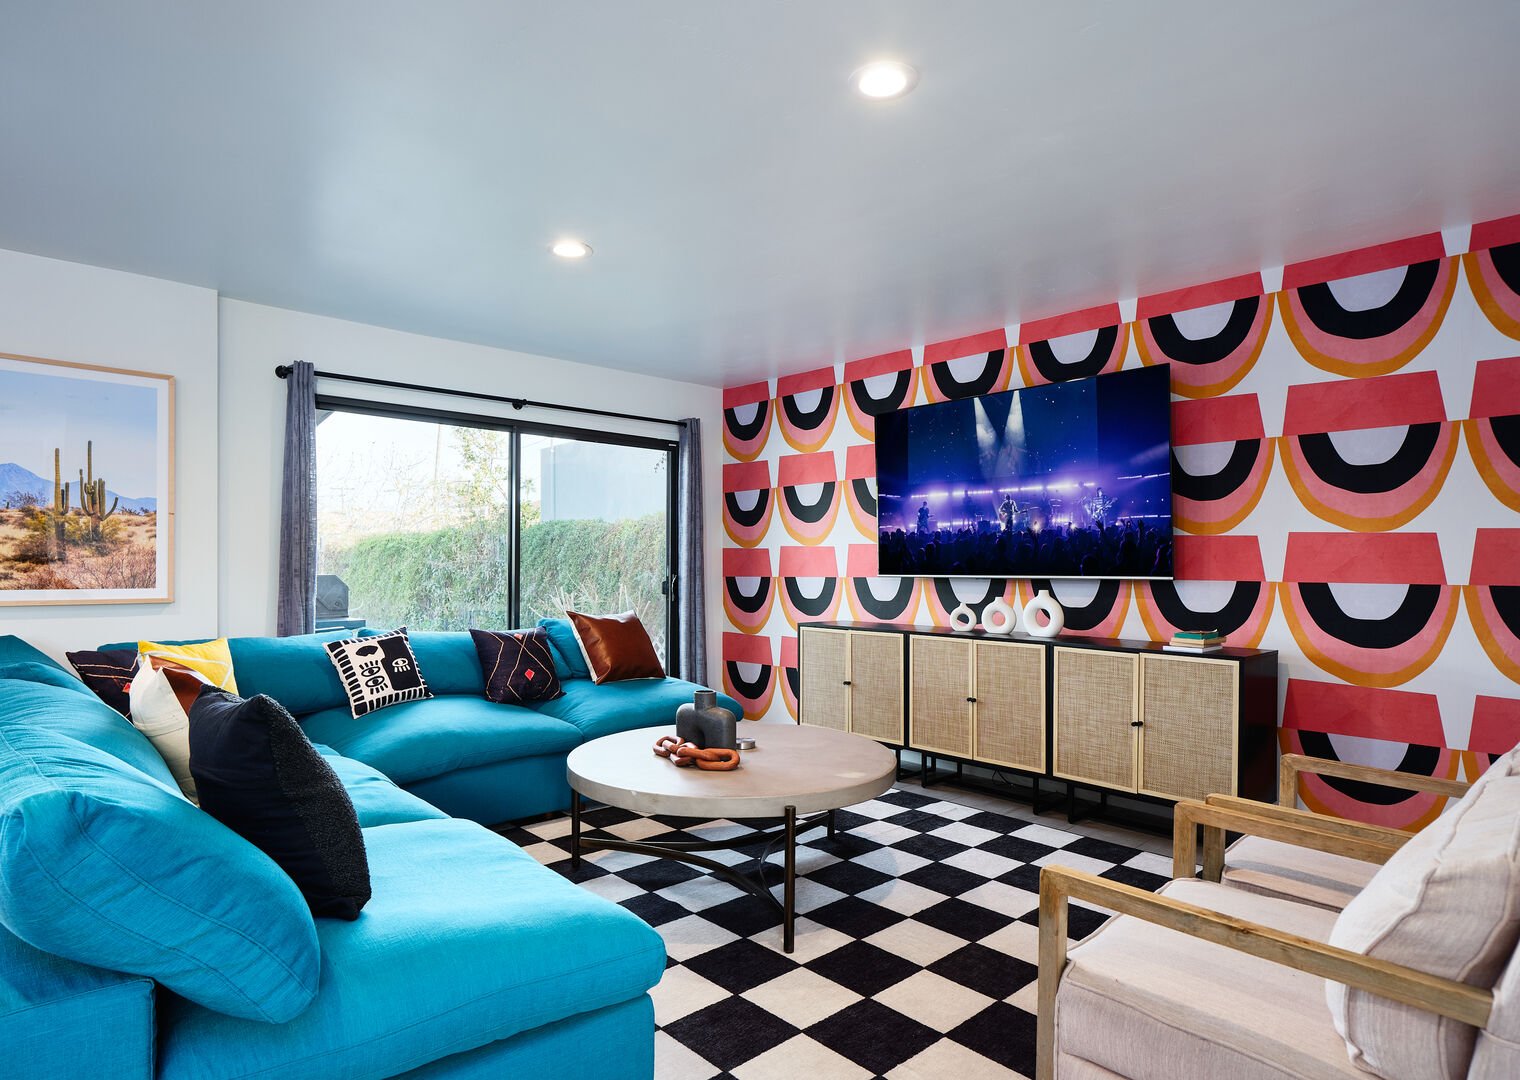 Newly designed living area with designer furnishings, decor, vibrant custom wall paper, and smart TV